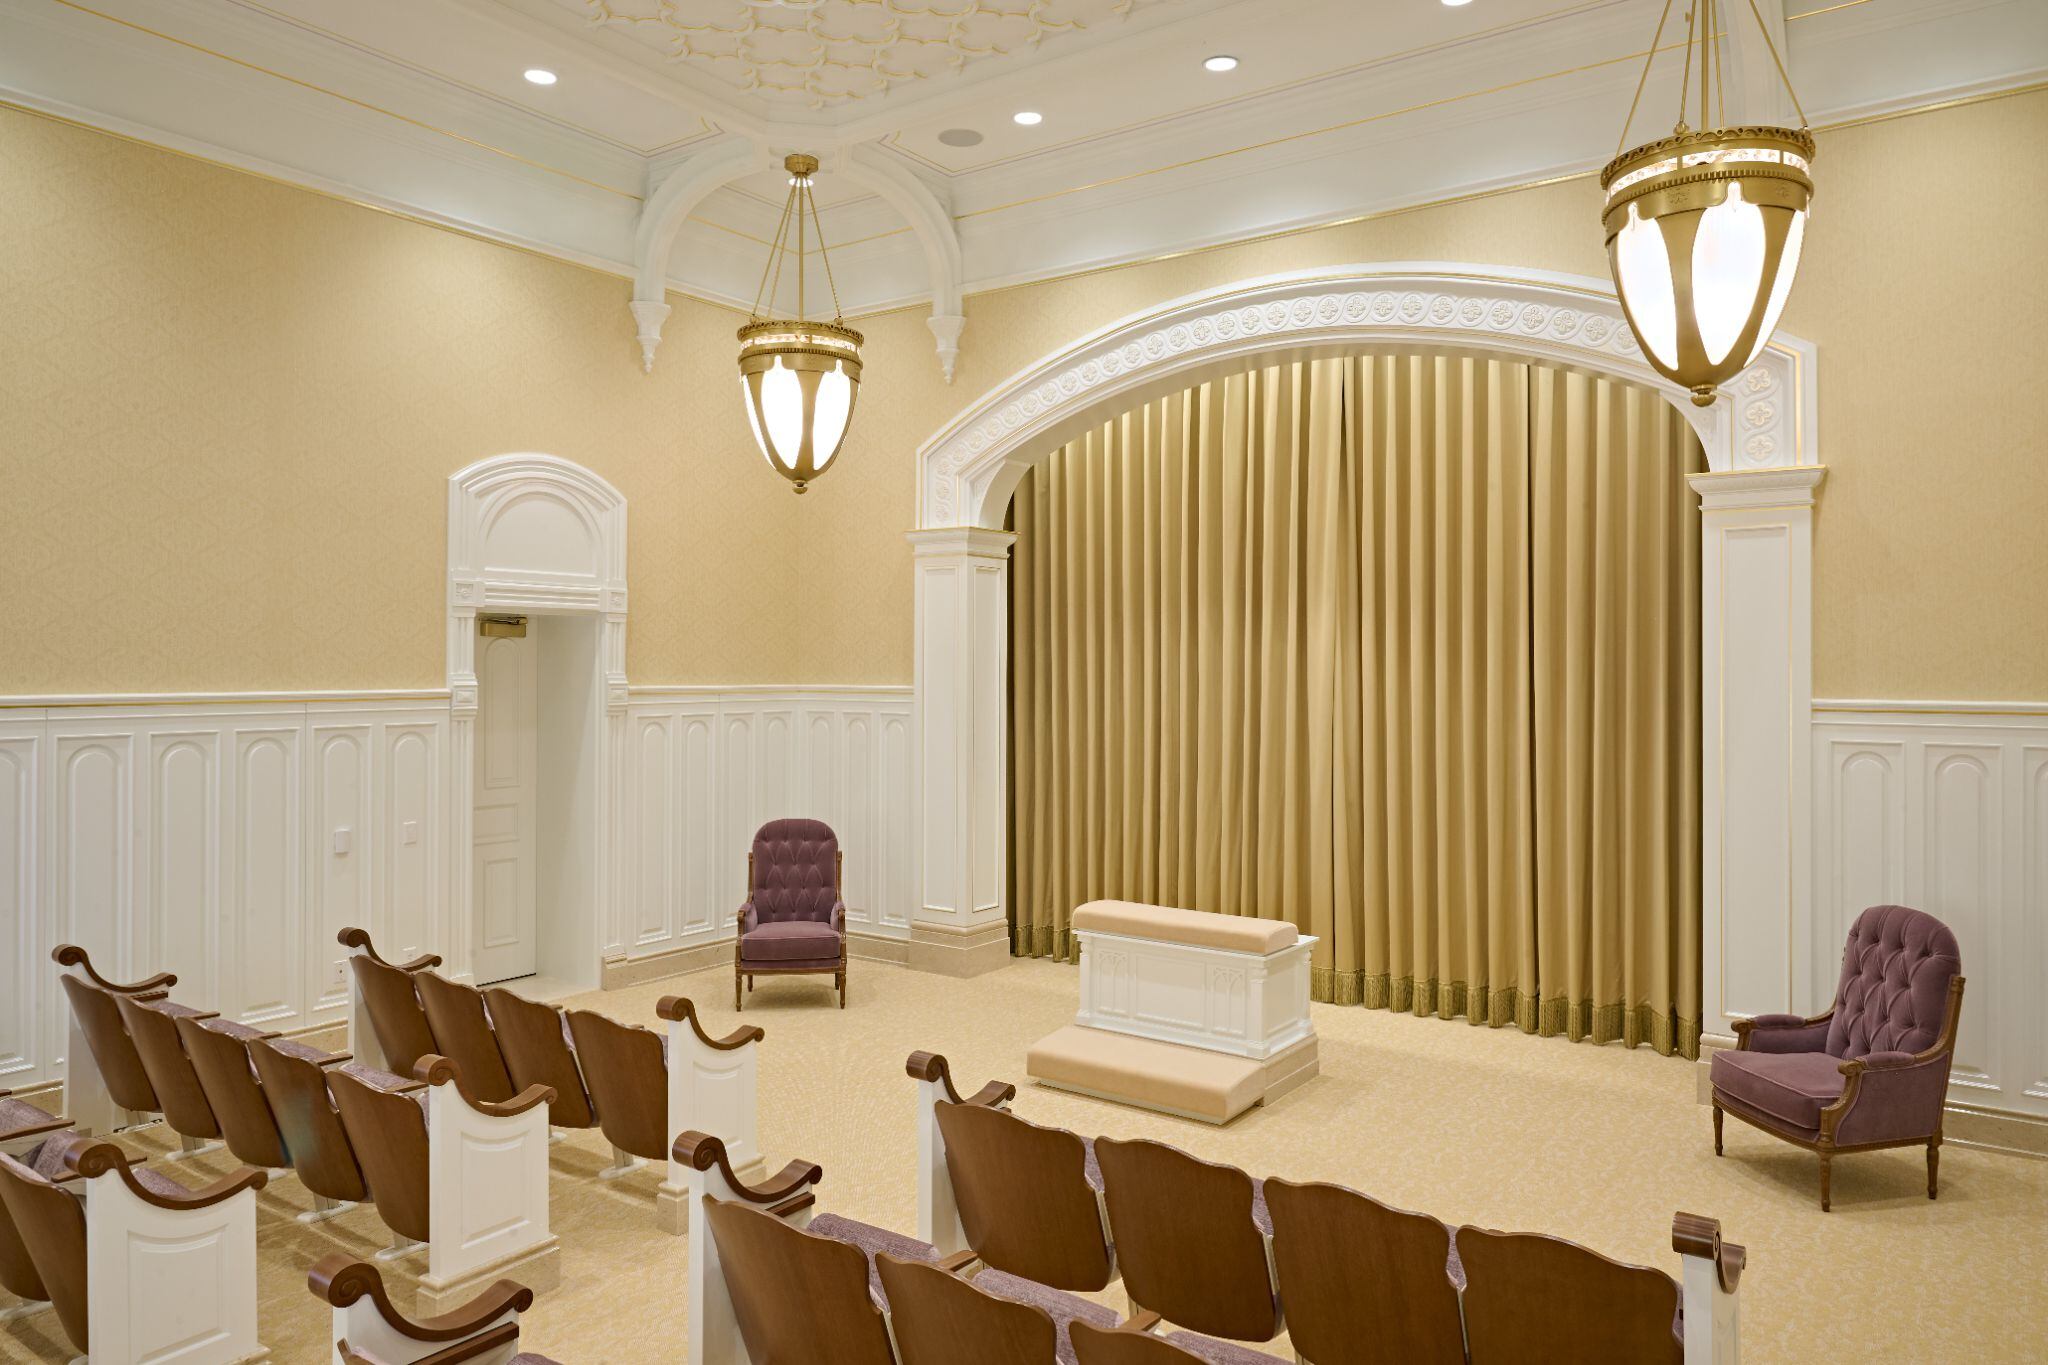 (The Church of Jesus Christ of Latter-day Saints) An instruction room inside the new Taylorsville Utah Temple.